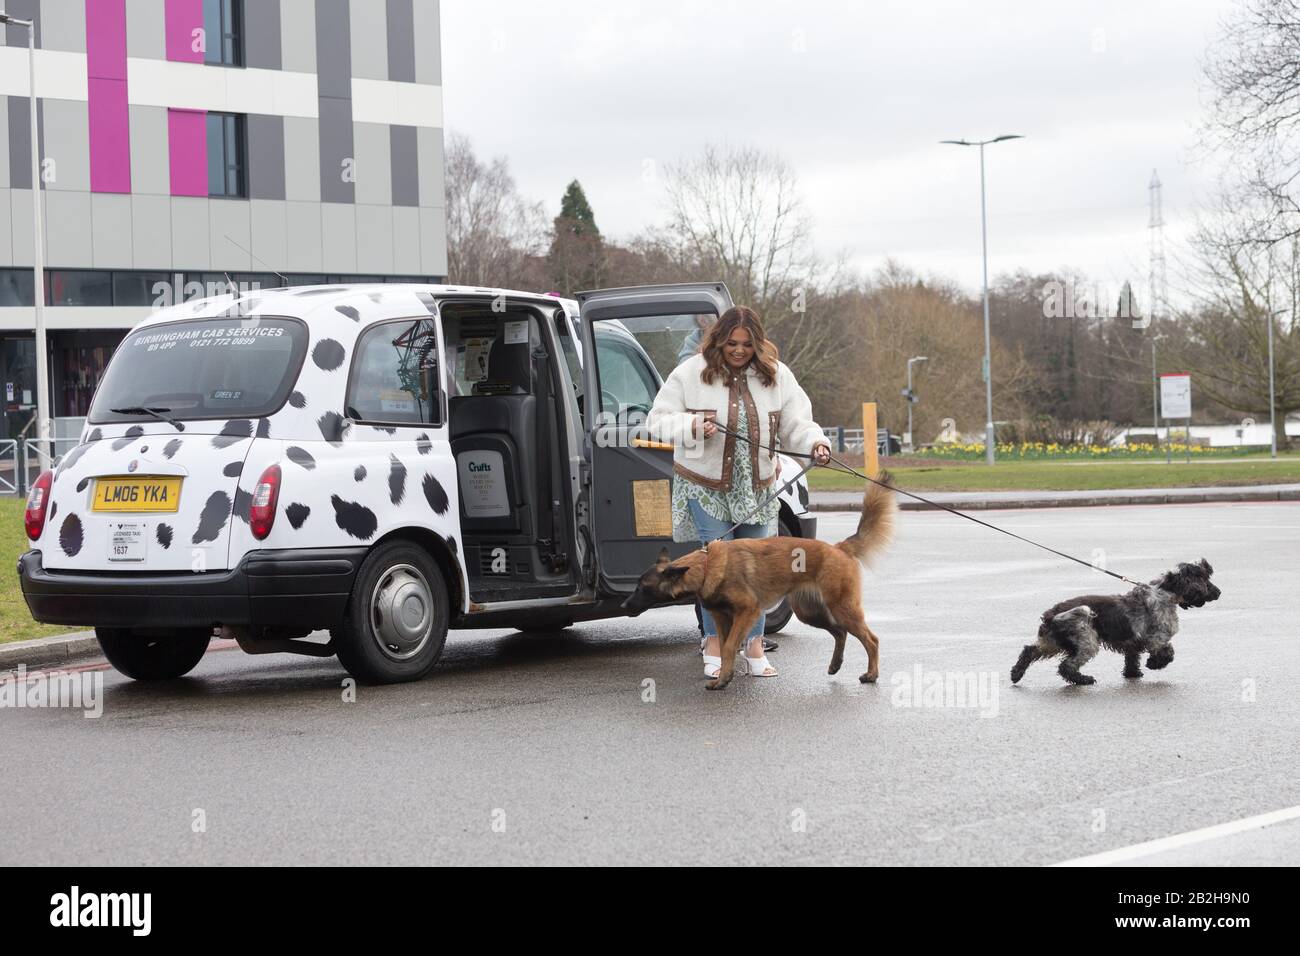 Birmingham NEC, UK. 3rd Mar, 2020. Scarlett Moffatt, star of Gogglebox and I'm a Celebrity, arrives in style in a Dalmation themed taxi at Crufts 2020, NEC Birmingham, to start preparations for the new Crufts Extra Youtube show. Crufts 2020 runs from 5th to 8th March. Credit: Peter Lopeman/Alamy Live News Stock Photo